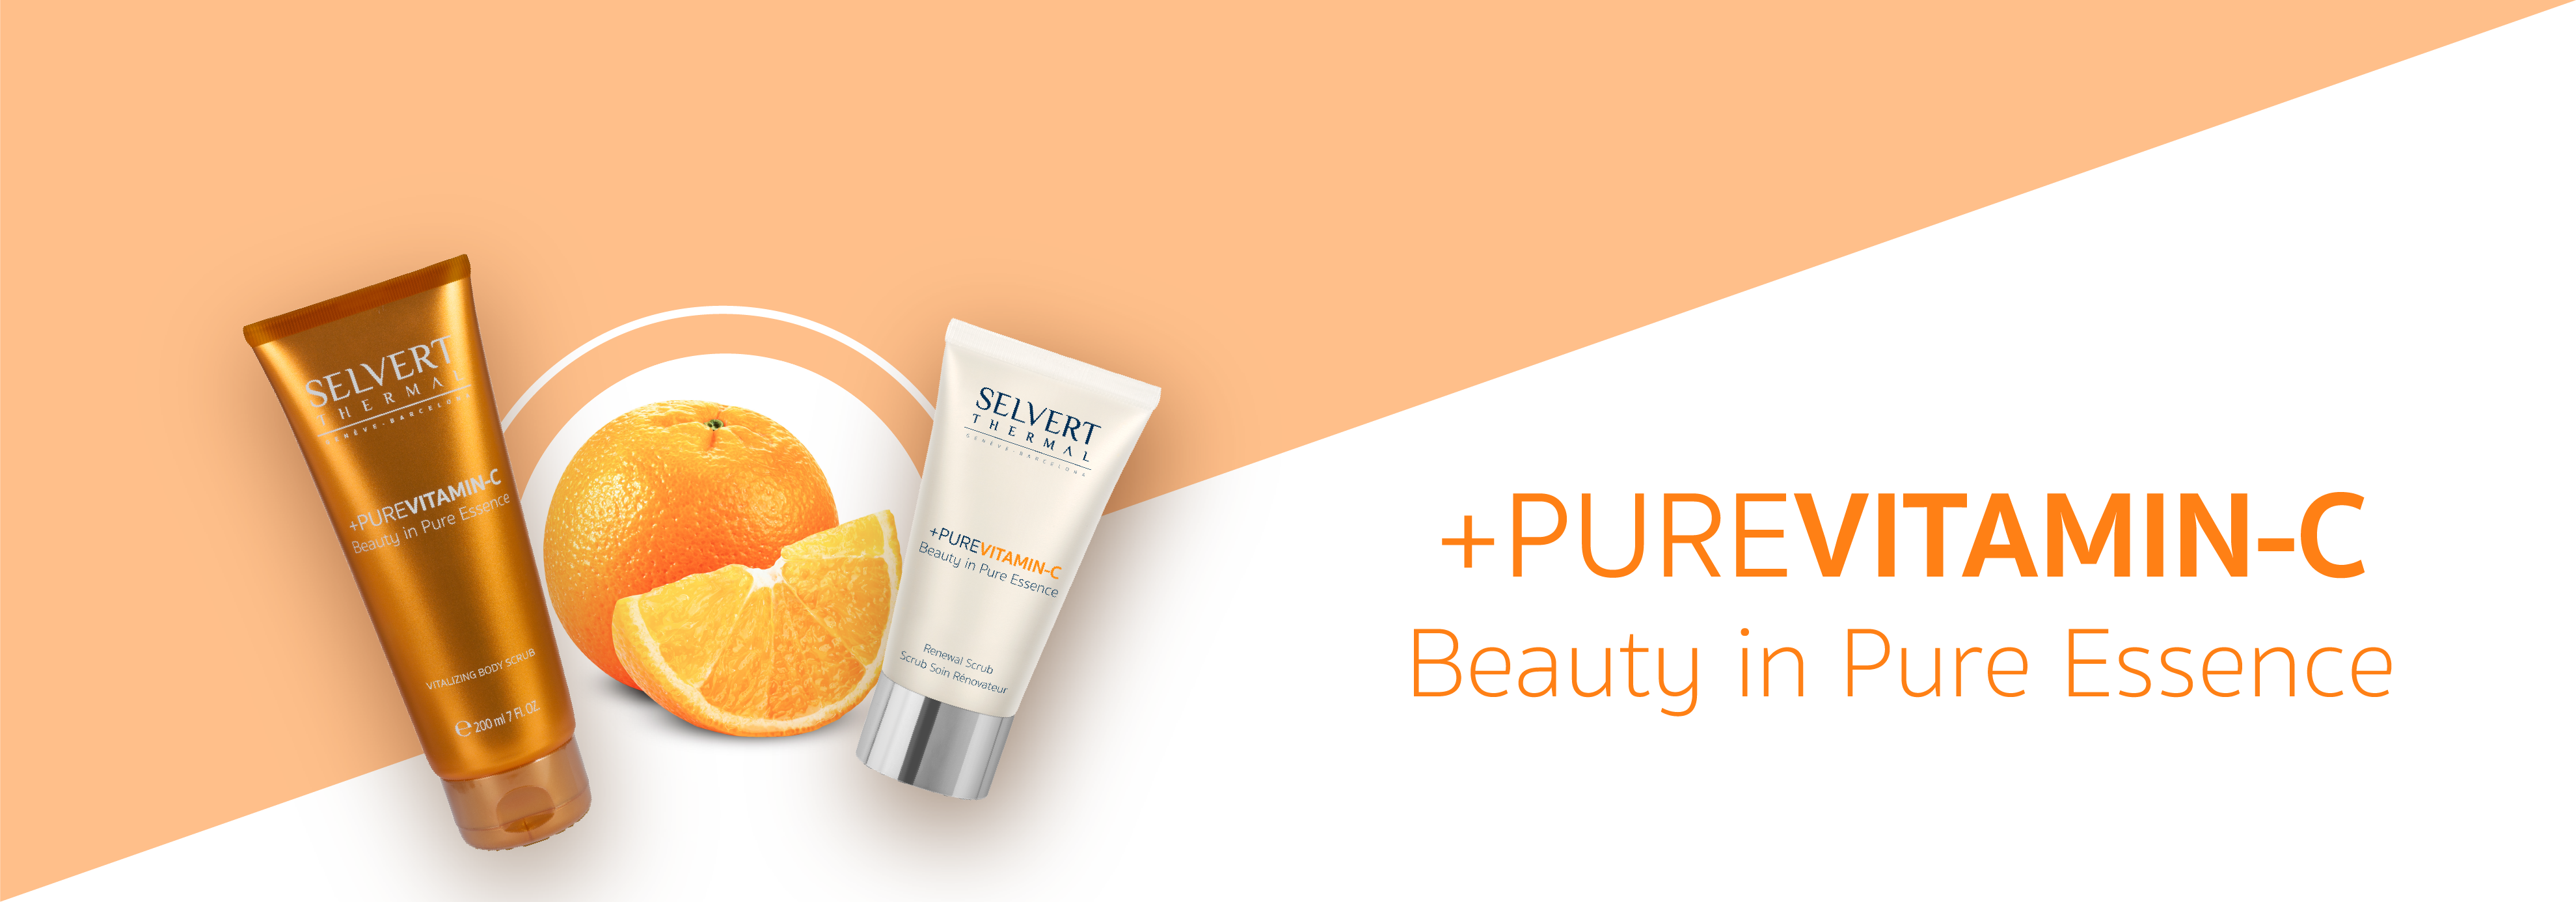 + PURE VITAMIN C <h4 style="text-align: center;">REVITALIZING &amp; ANTIOXIDANT PROGRAMME</h4>
<p style="text-align: justify;">&nbsp;</p>
<p style="text-align: justify;">Vitamin C is one of the most comprehensive sources of beauty for the skin. Thanks to its multiple properties, it is one of the active products that acts best against cell oxidation and therefore forms an essential part of beauty treatments.</p>
<p style="text-align: justify;">To prevent cell oxidation that is caused by free radicals, our body generates a defensive device in order to mitigate oxidation damage, which is sometimes not enough taking into account the aggressions we are subjected to and that contribute towards reducing the levels of antioxidants in our body.</p>
<p style="text-align: justify;">+ Pure Vitamin C by Selvert Thermal, will complement and reinforce this defence mechanism by neutralising and minimising the action of free radicals and consequently premature aging. The skin will recover its luminosity, youthfulness and freshness right from the ﬁrst session.</p>